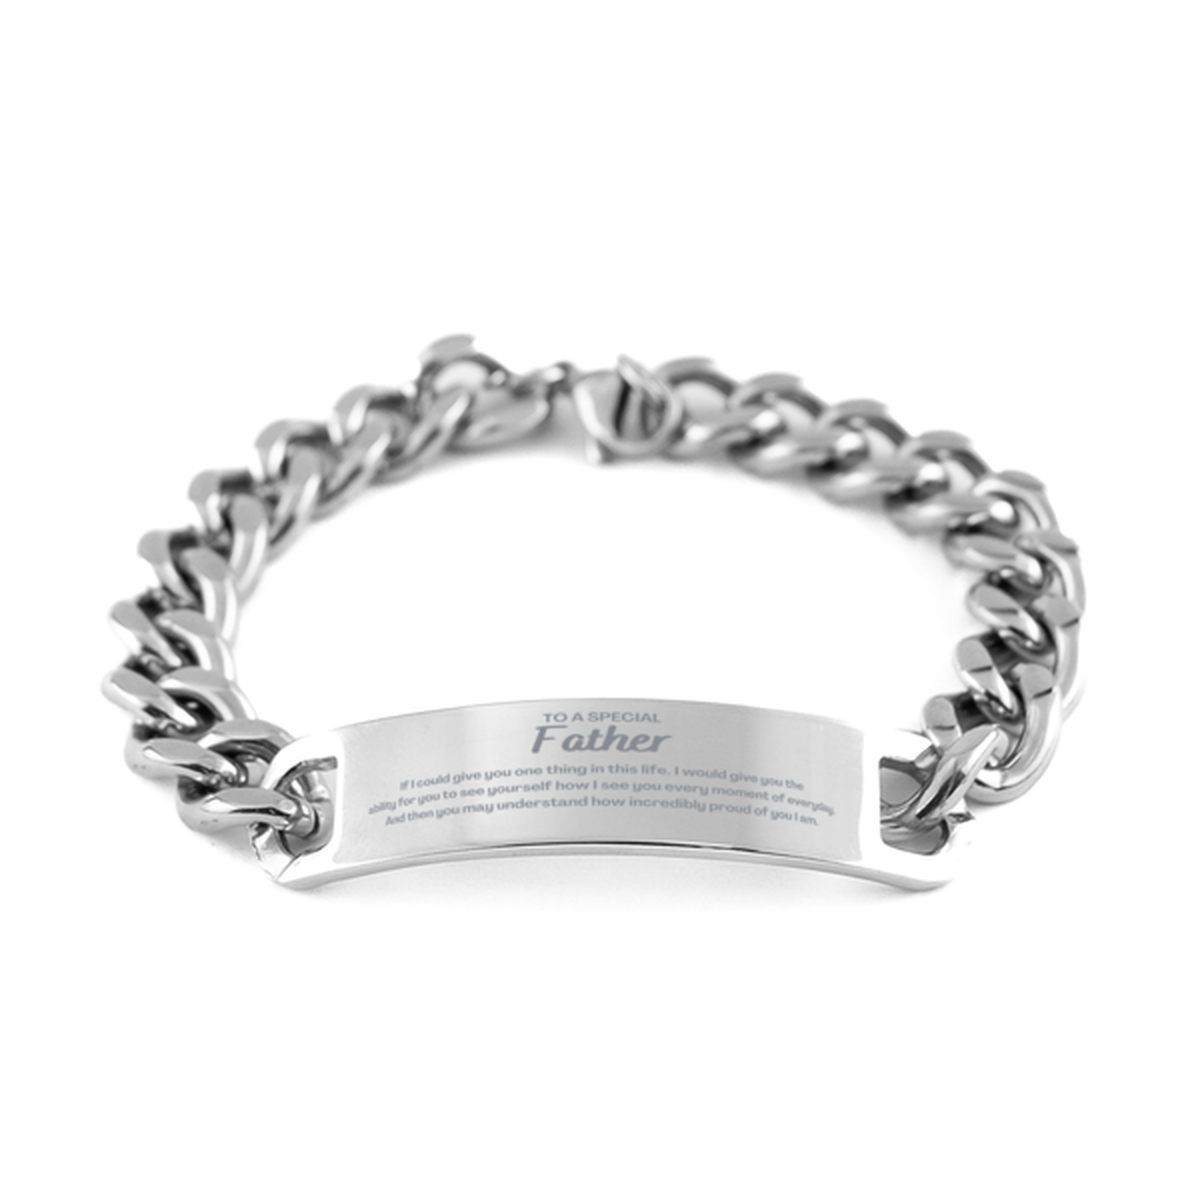 To My Father Cuban Chain Stainless Steel Bracelet, Gifts For Father Engraved, Inspirational Gifts for Christmas Birthday, Epic Gifts for Father To A Special Father how incredibly proud of you I am